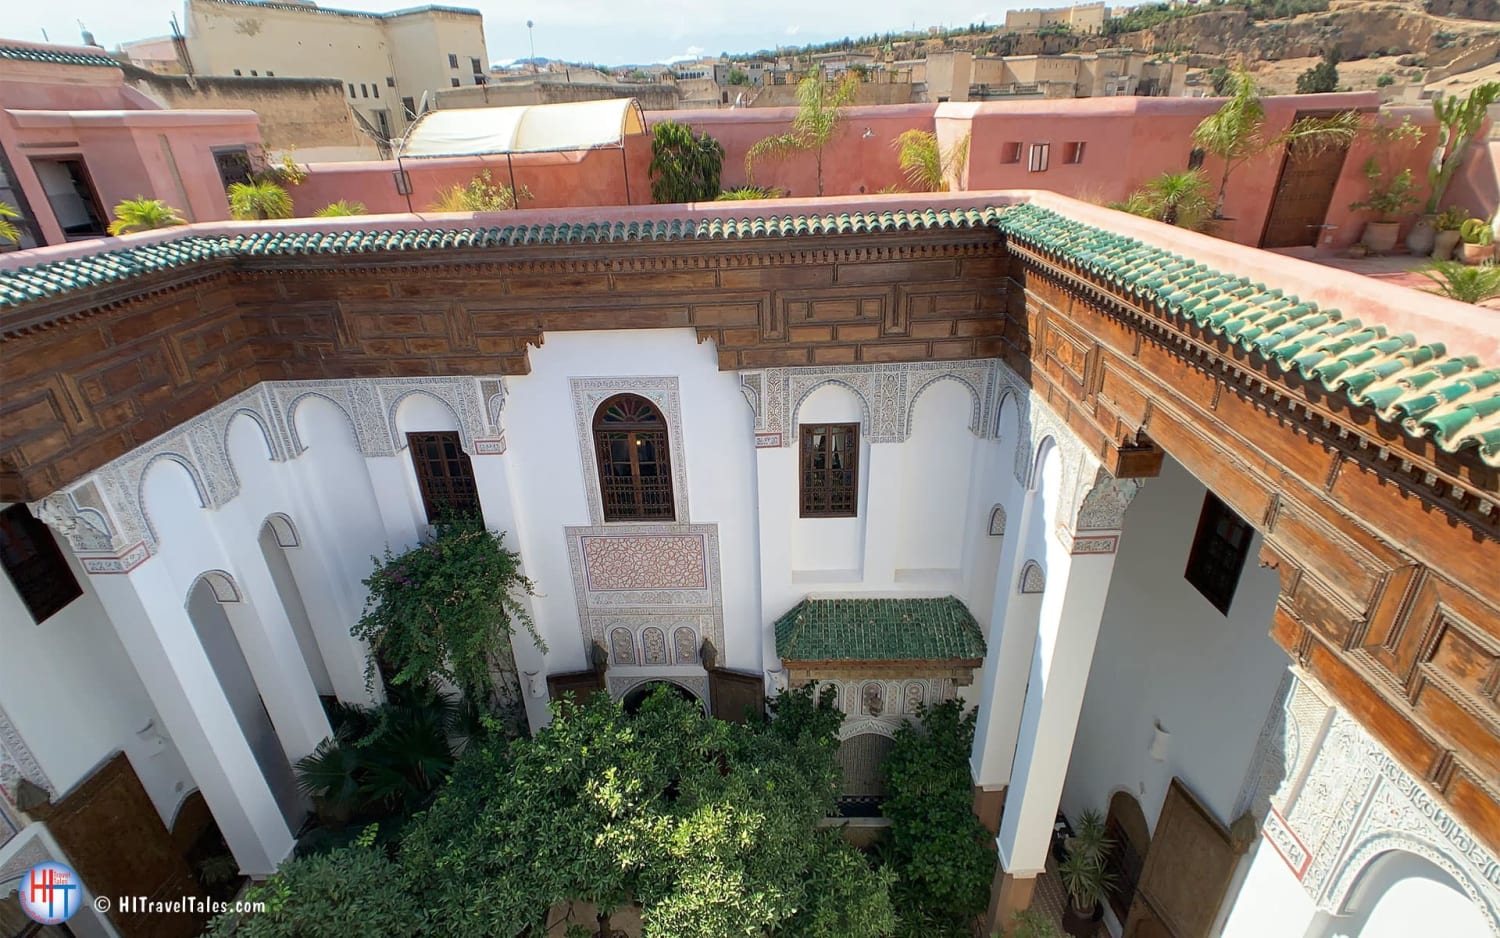 Best luxury hotel in Fes Morocco: Riad Laaroussa can’t be beat